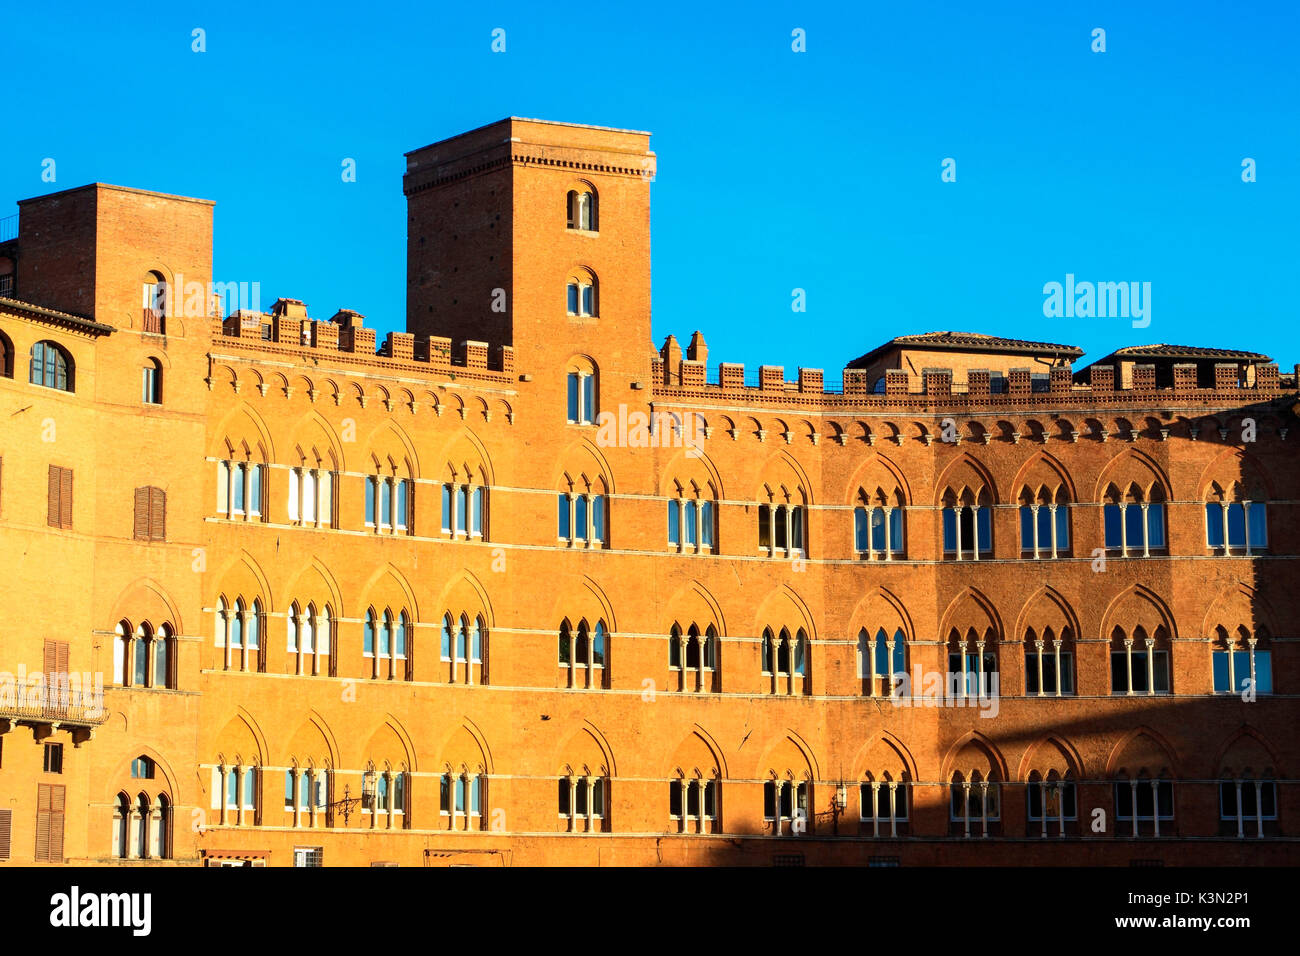 Old palace in Piazza del Campo in Siena, Tuscany, Italy, Europe Stock Photo